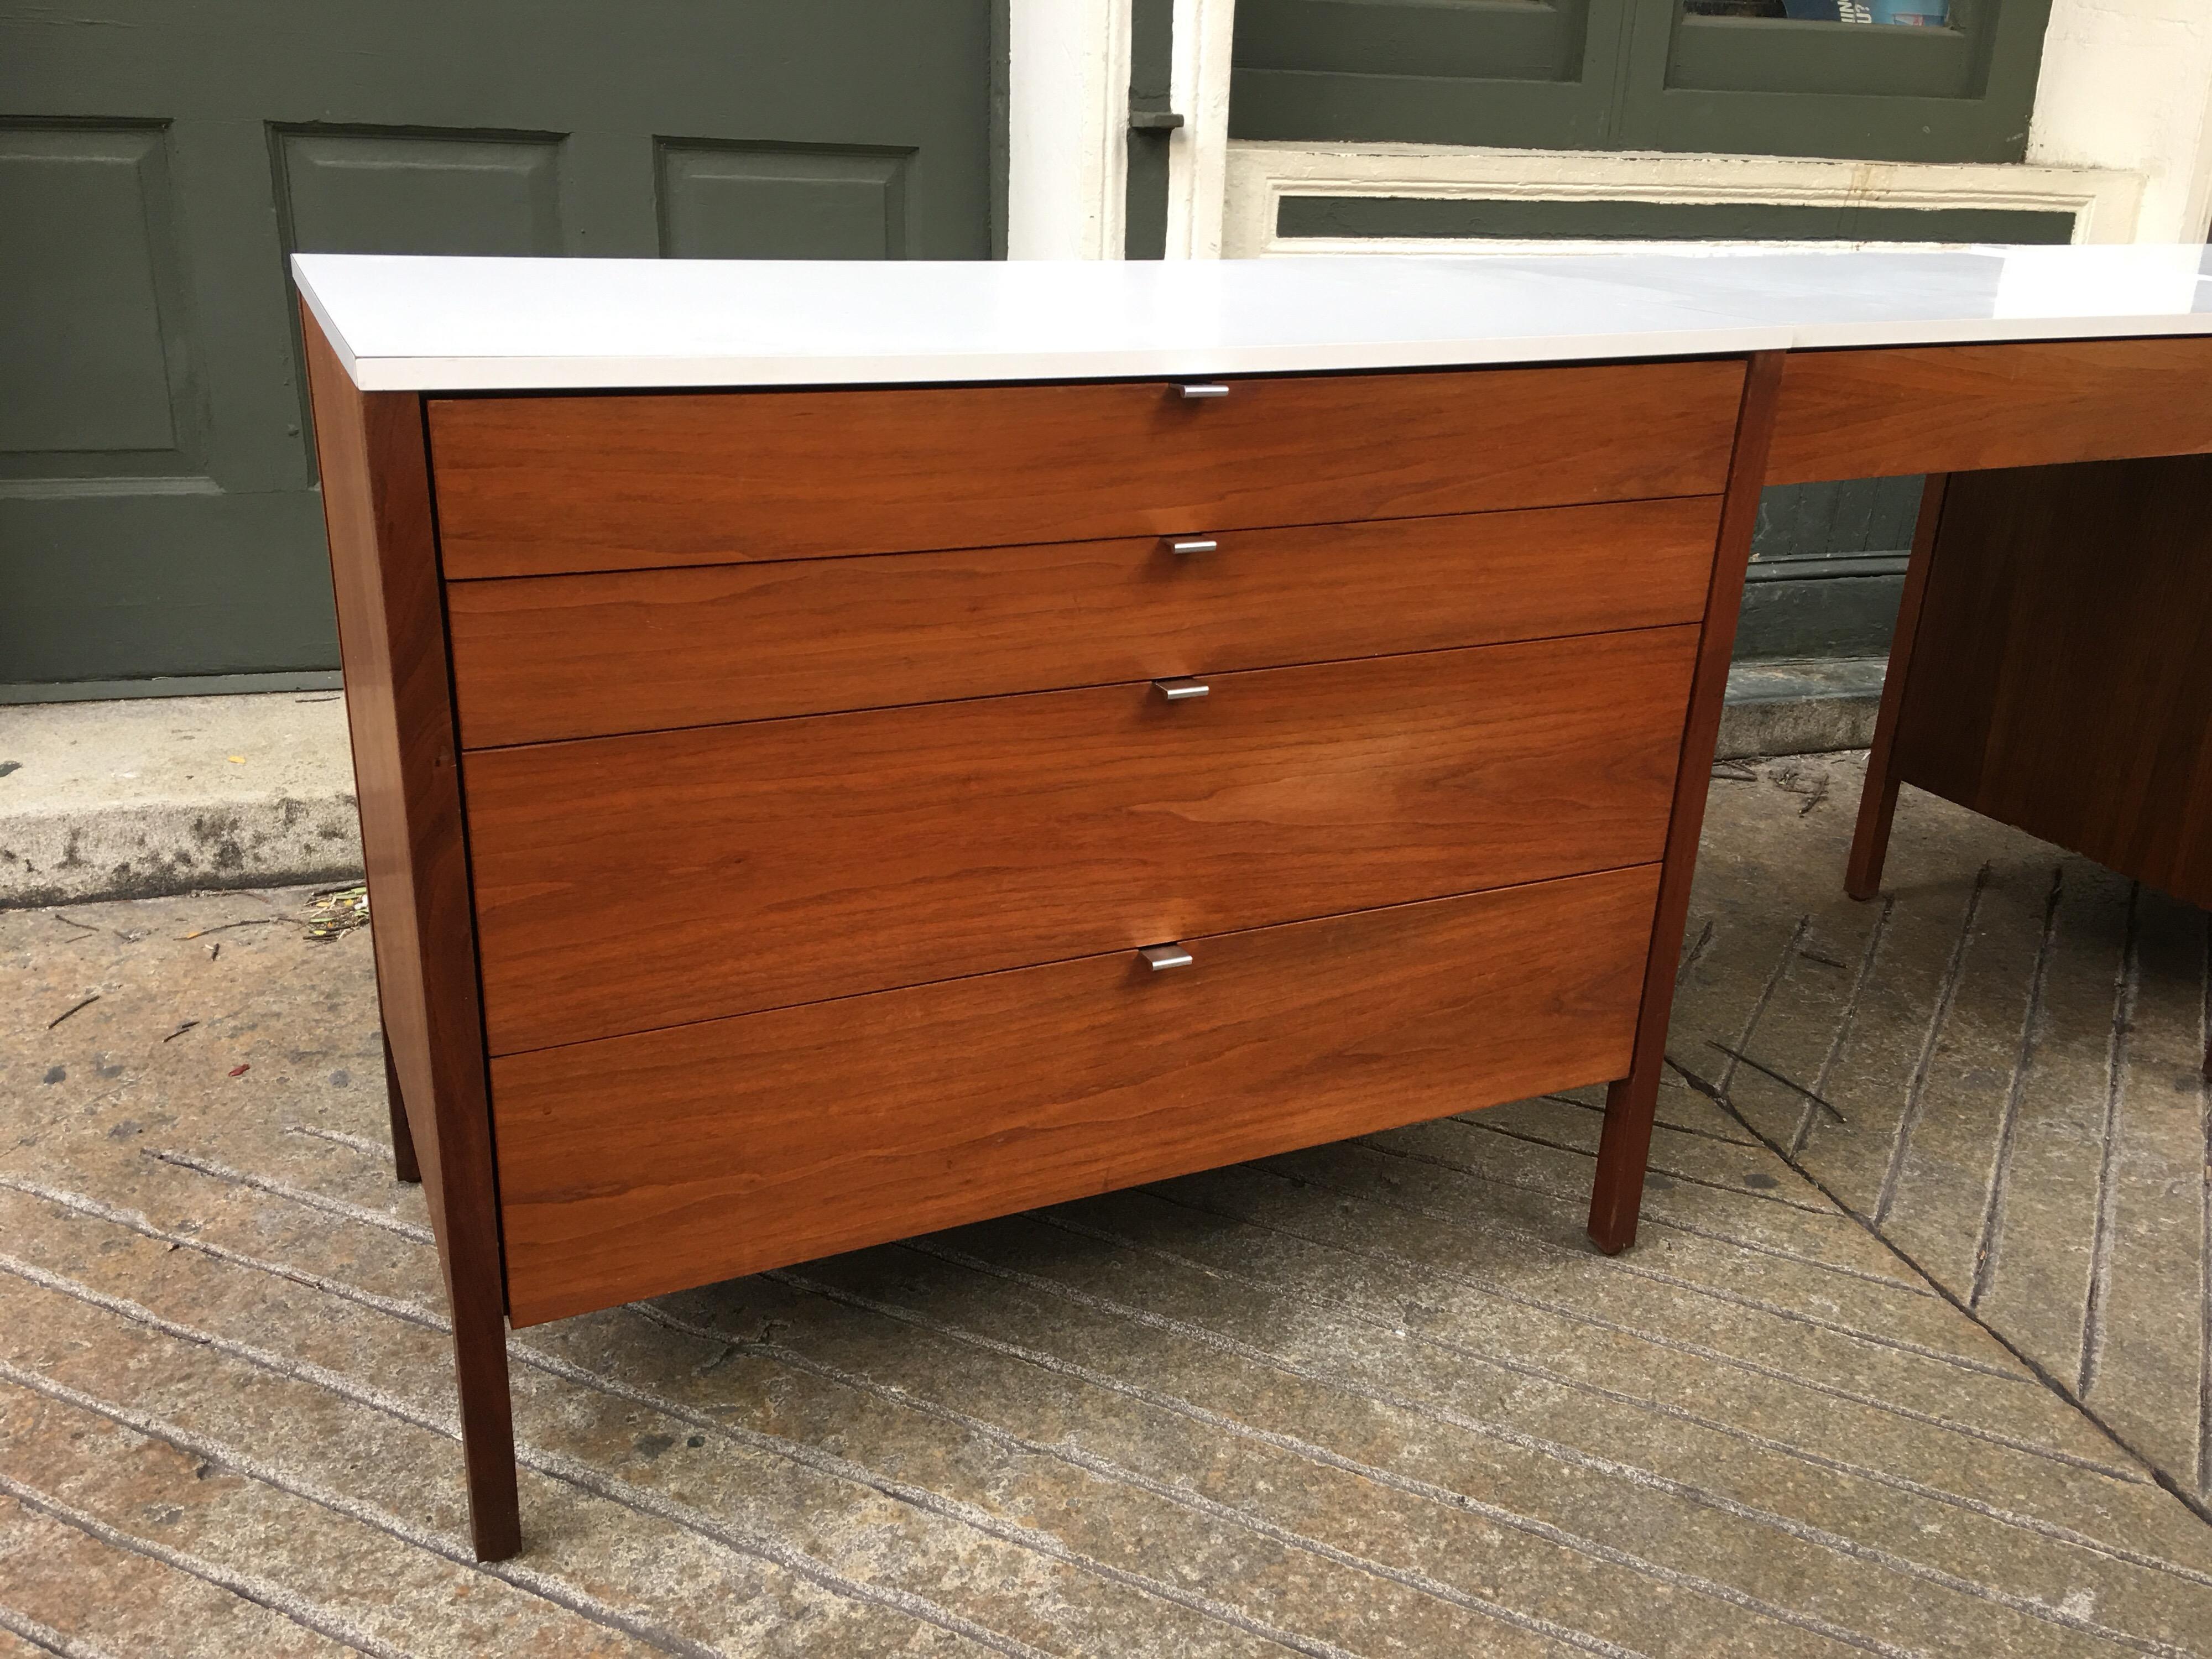 Florence Knoll for Knoll dresser and desk/vanity in walnut with white Formica tops and chrome drawer pulls. One three drawer and the other four with one drawer in suspended vanity/desk. All original and bought from the original owner.